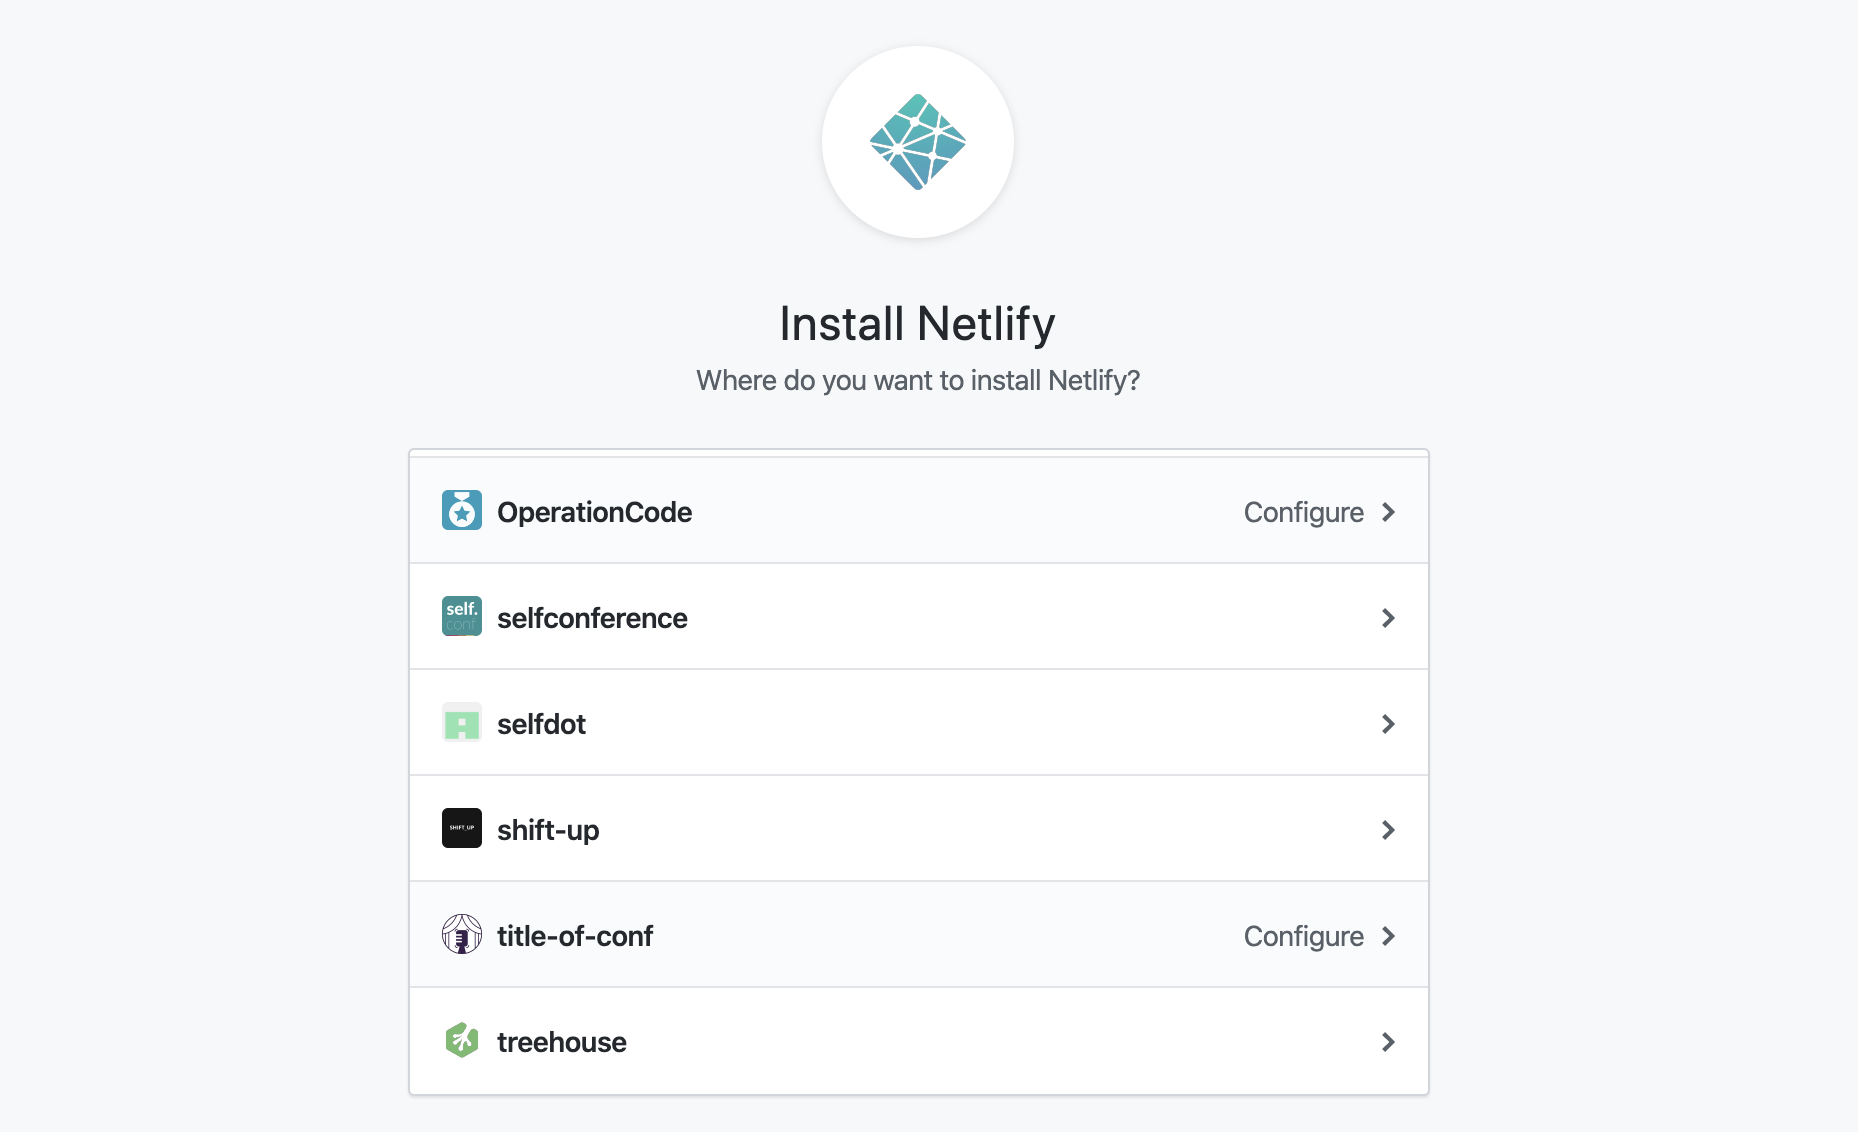 Install and/or configure Netlify for the GitHub account or organization of your choice